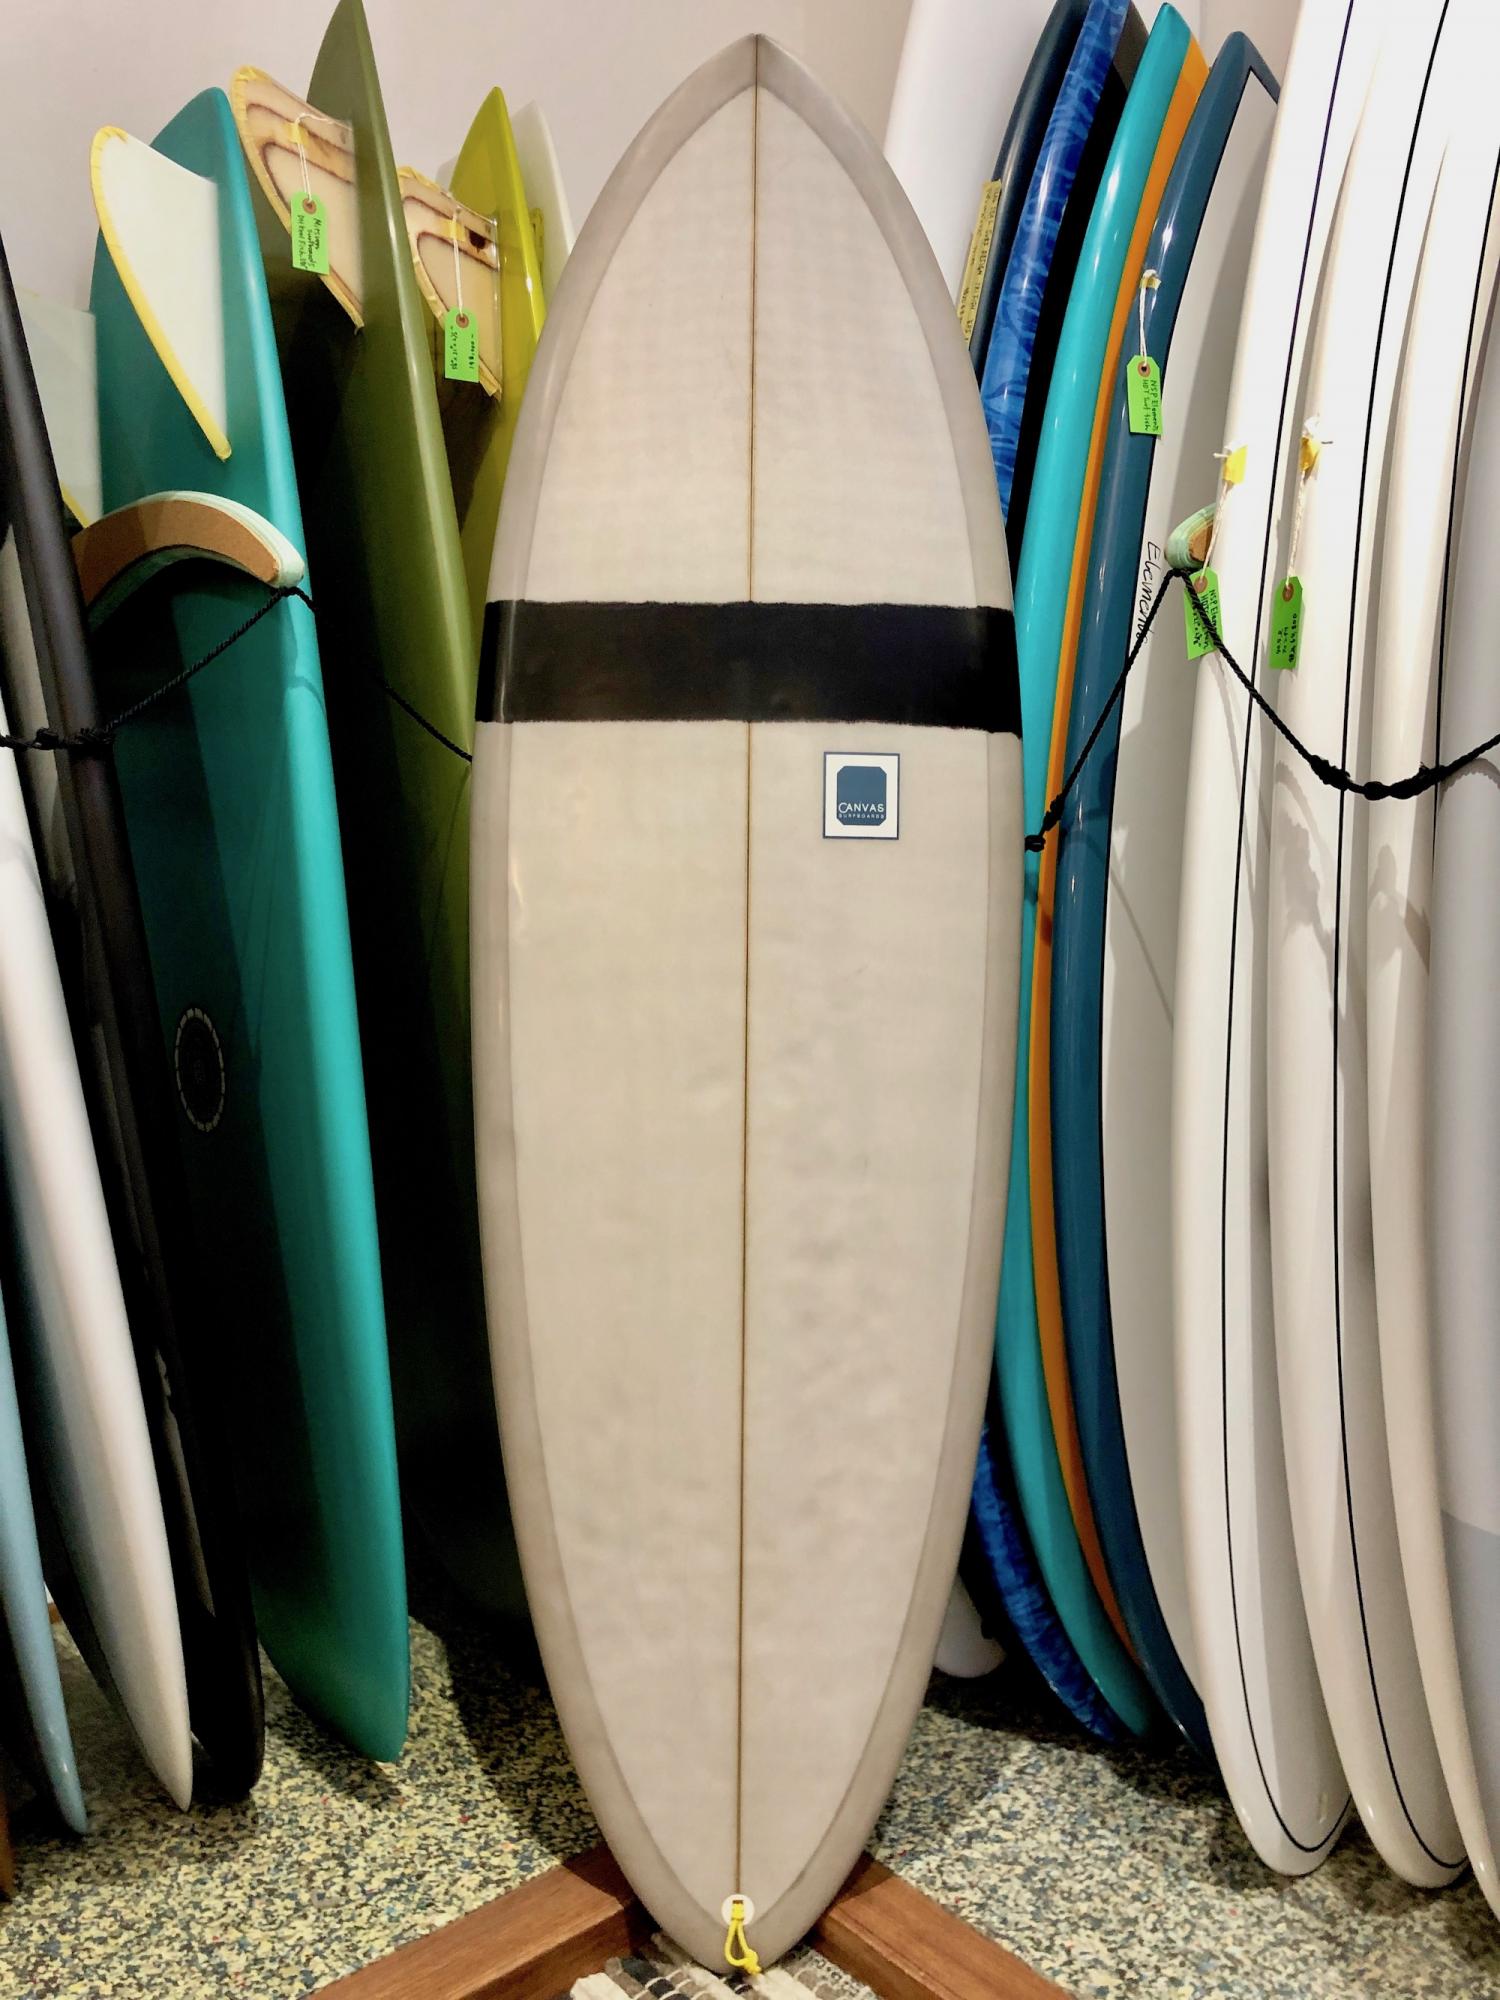 USED BOARDS (CANVAS SURFBOARDS Flow 5.6)